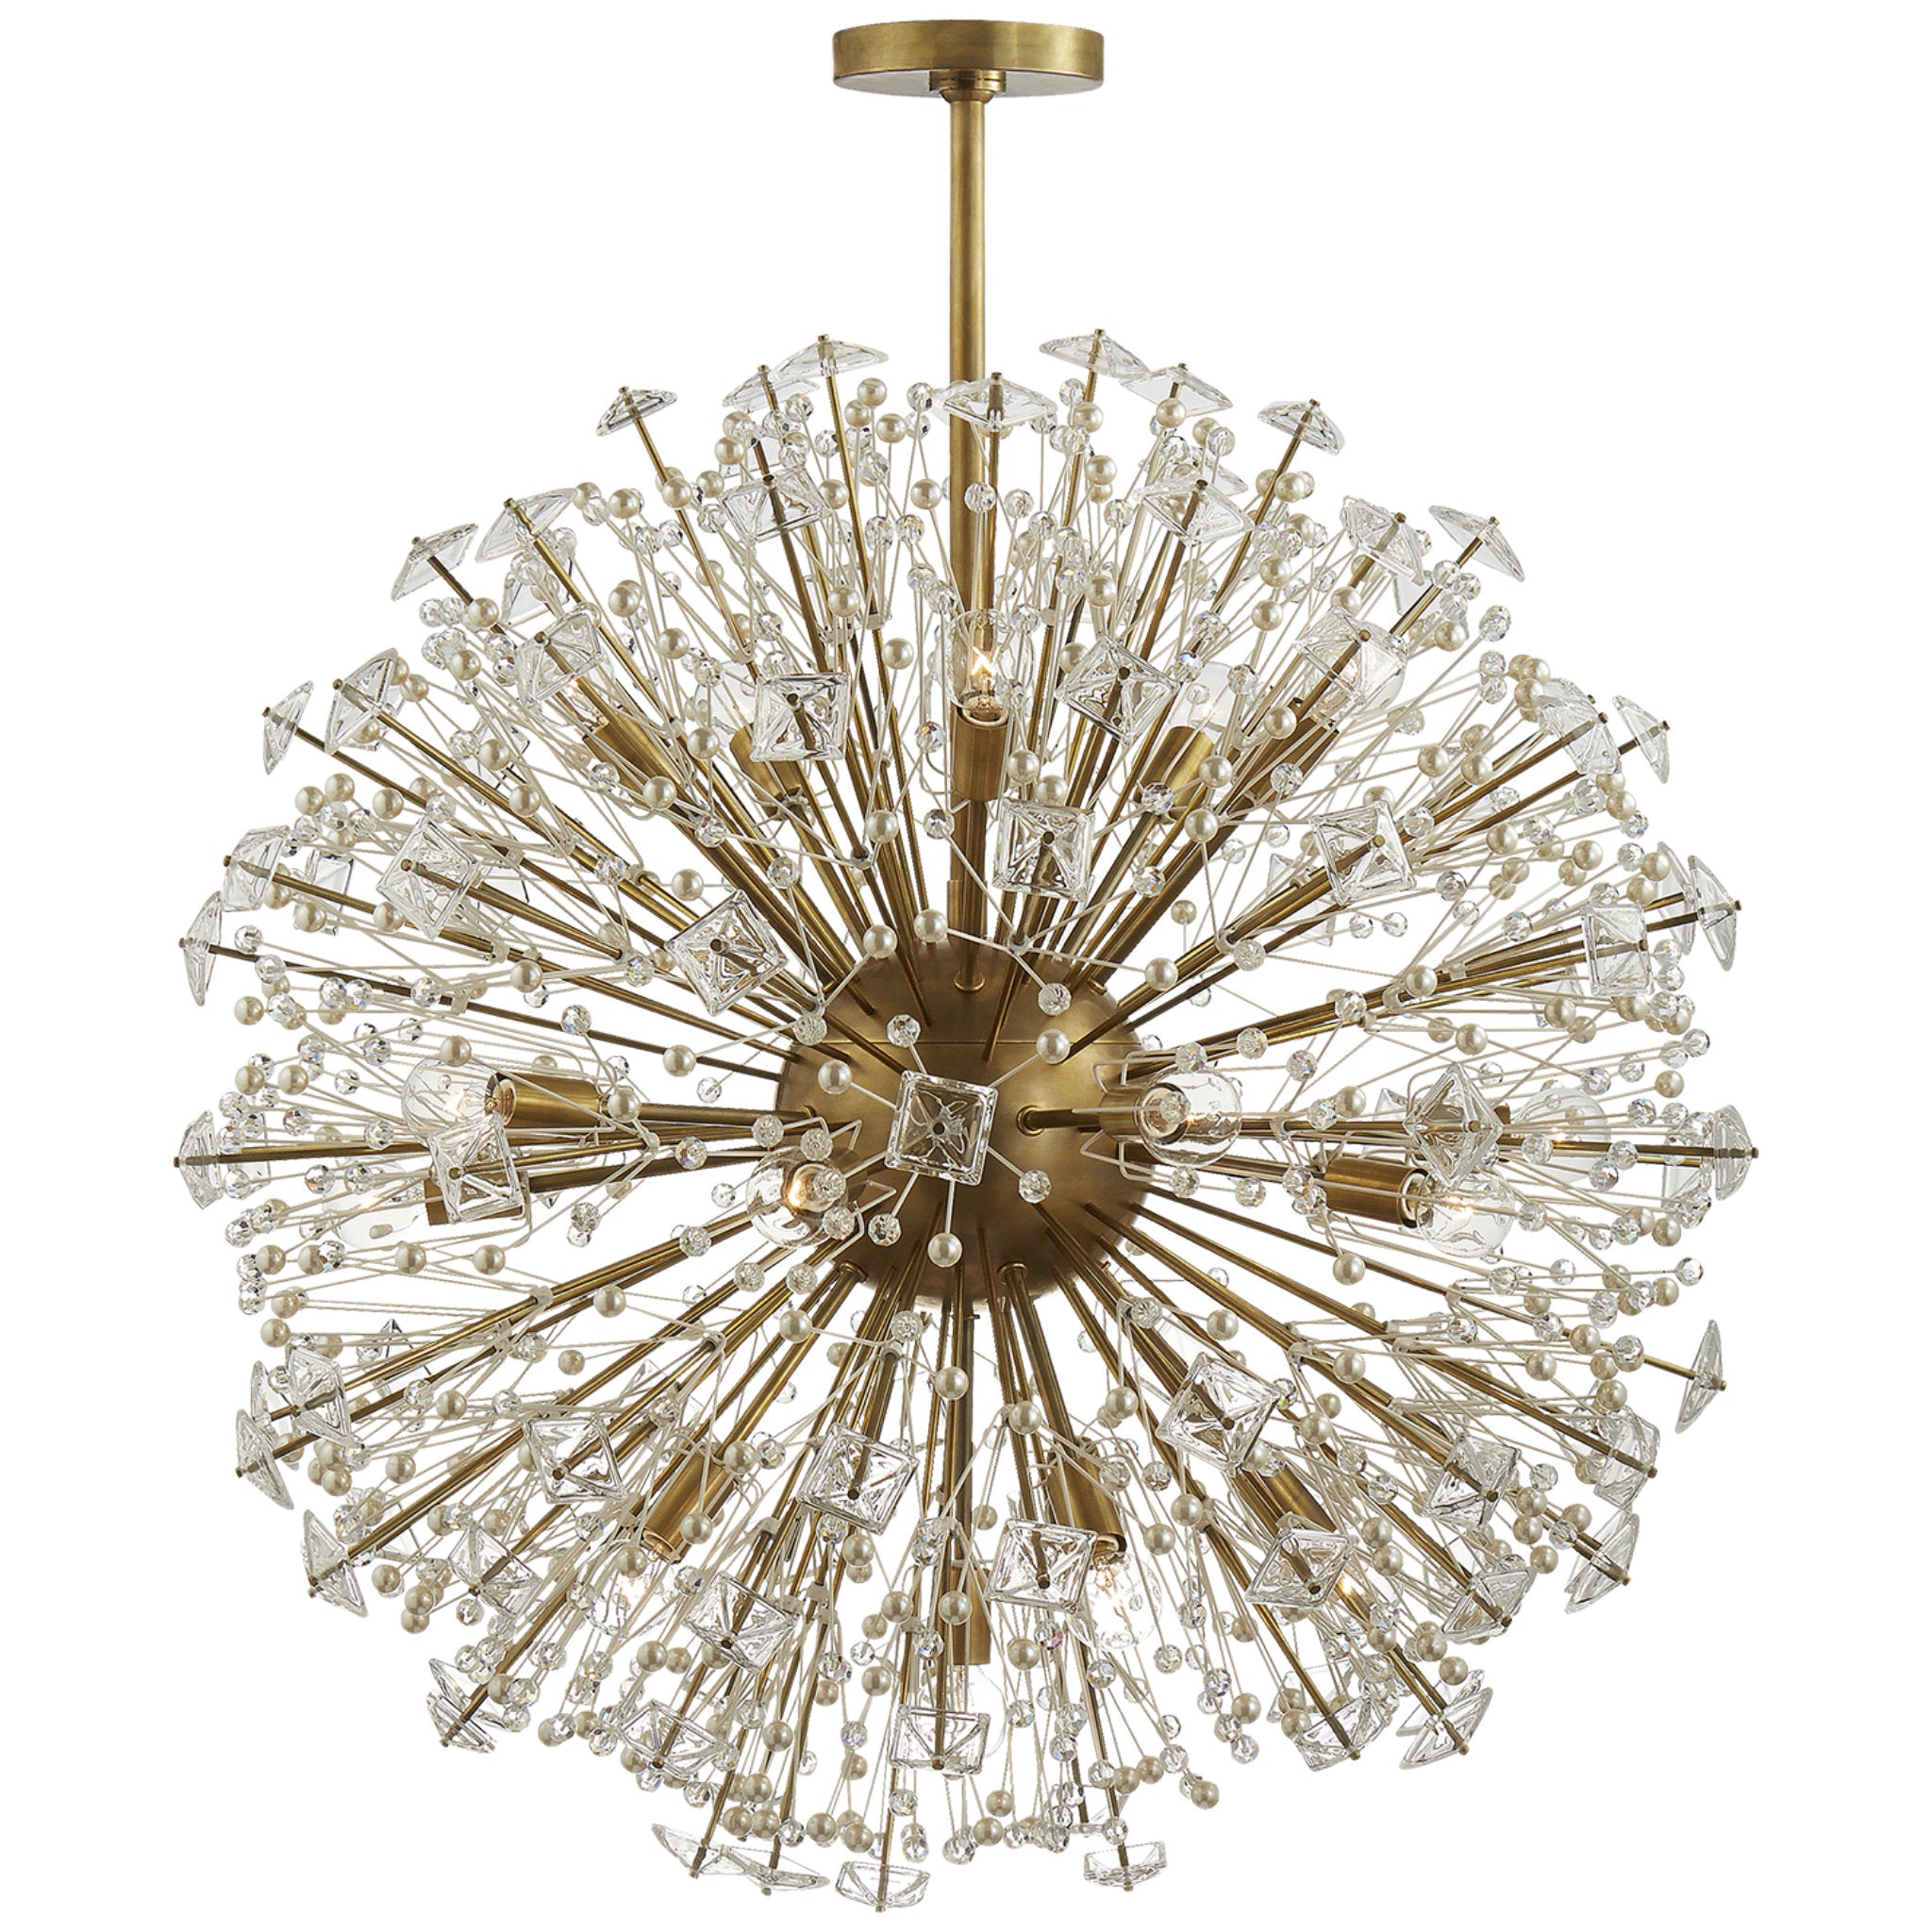 kate spade new york Dickinson Large Chandelier in Soft Brass with Clear Glass and Cream Pearls